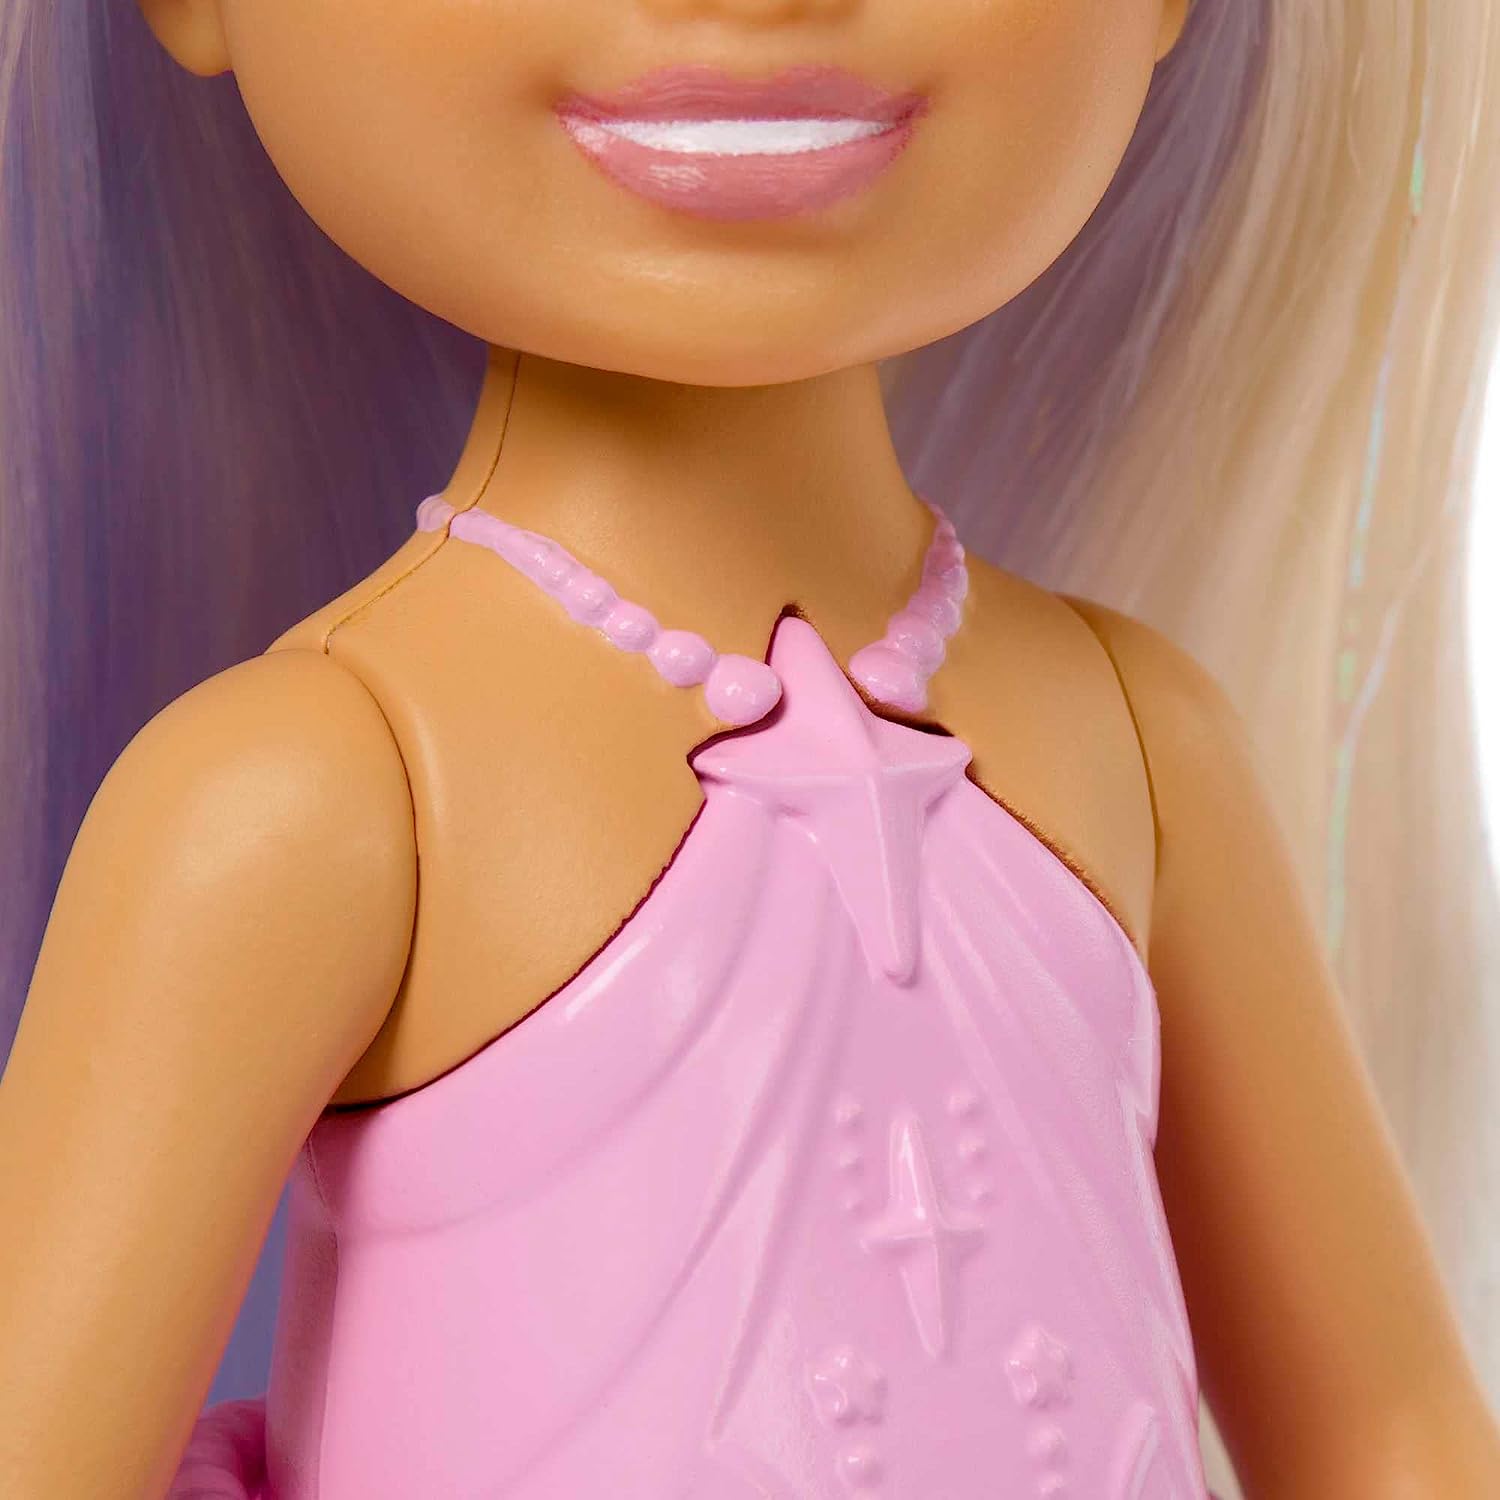 Barbie Unicorn-Inspired Chelsea Doll with Lavender Hair, Unicorn Toys, Horn Headband and Detachable Tail